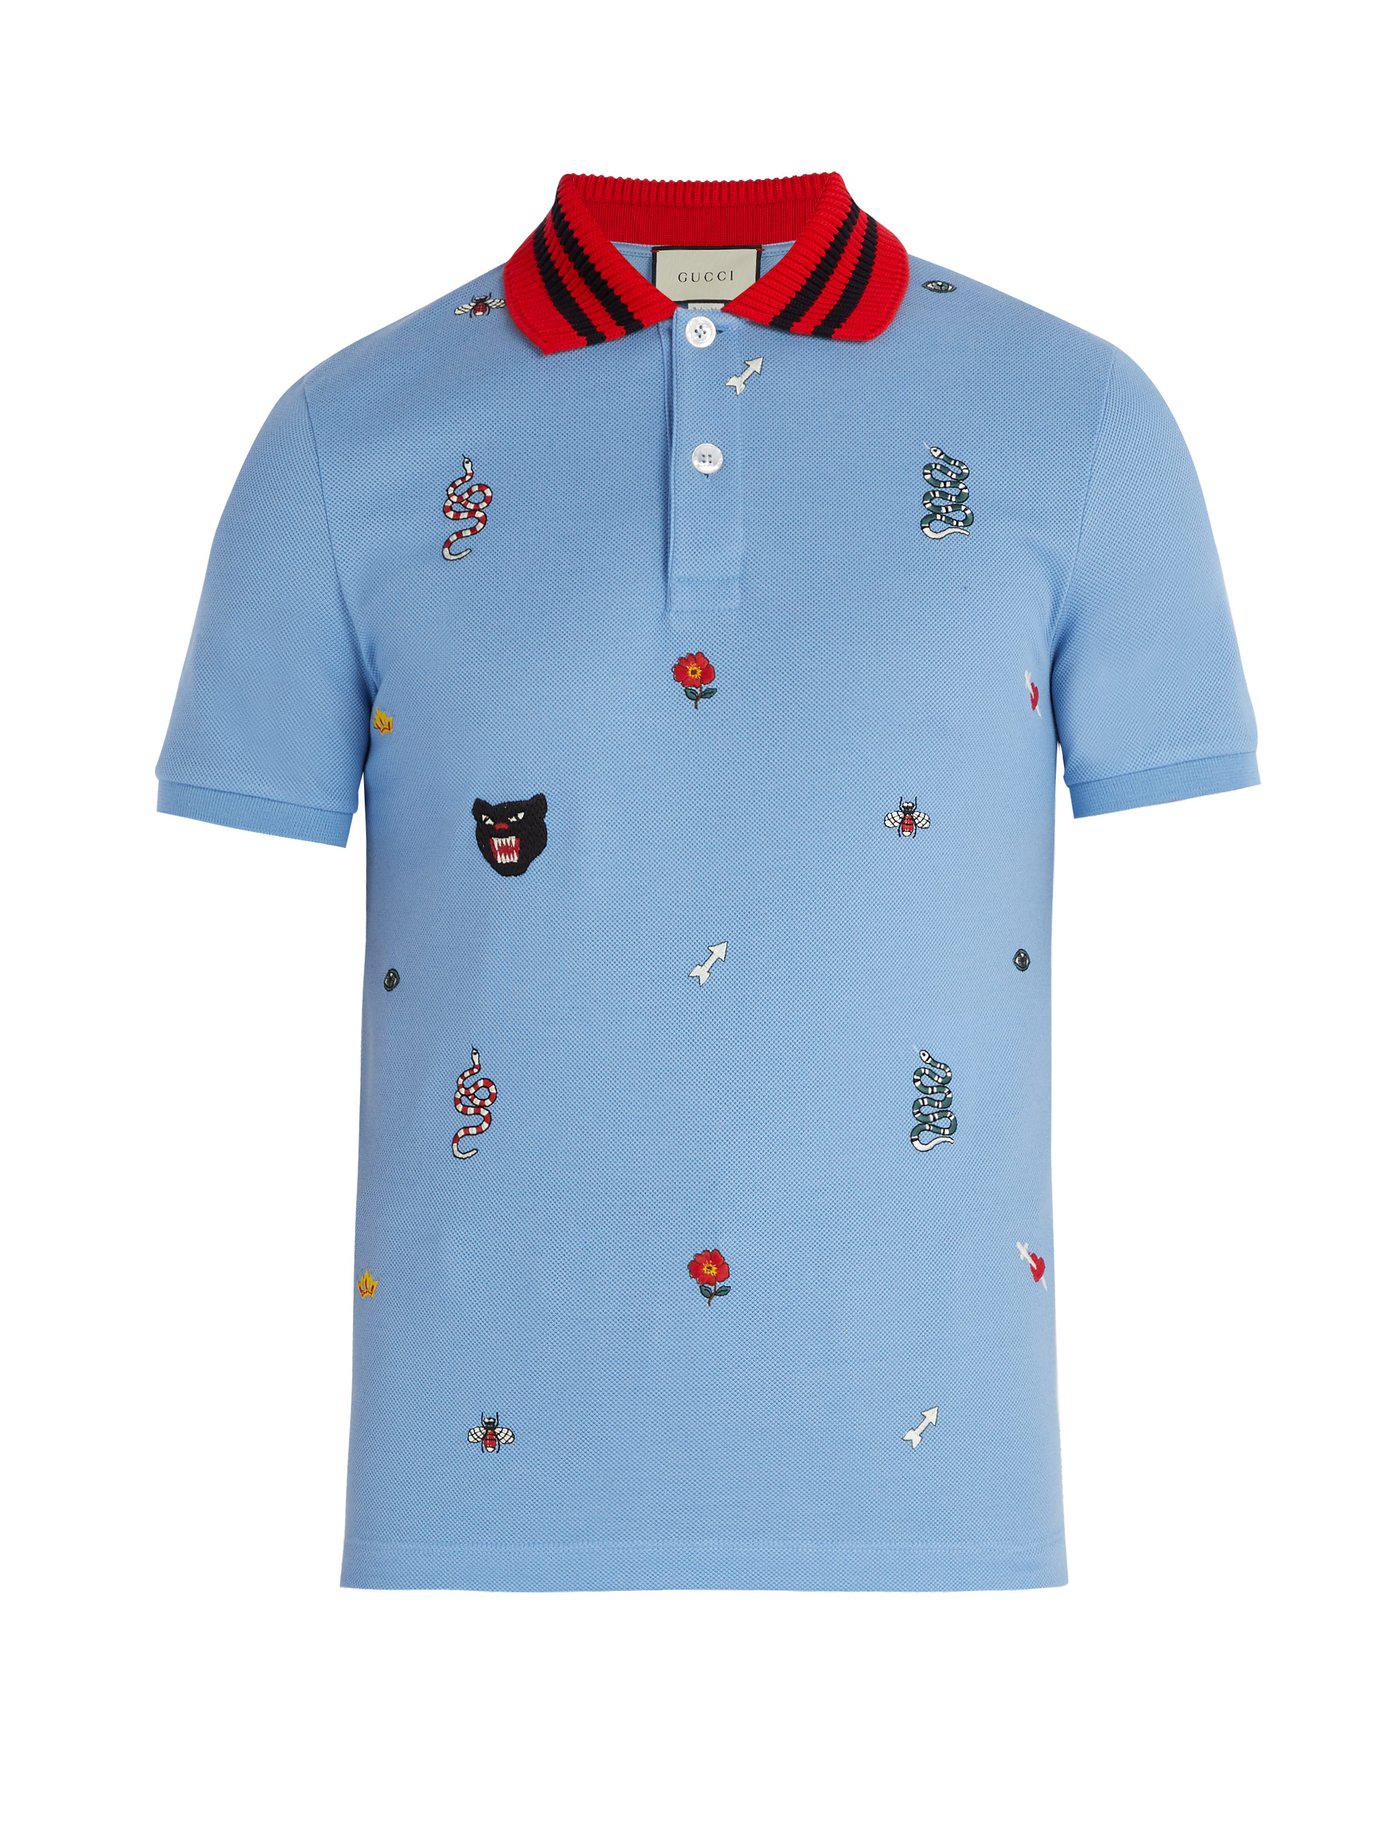 gucci blue polo, OFF 78%,welcome to buy!